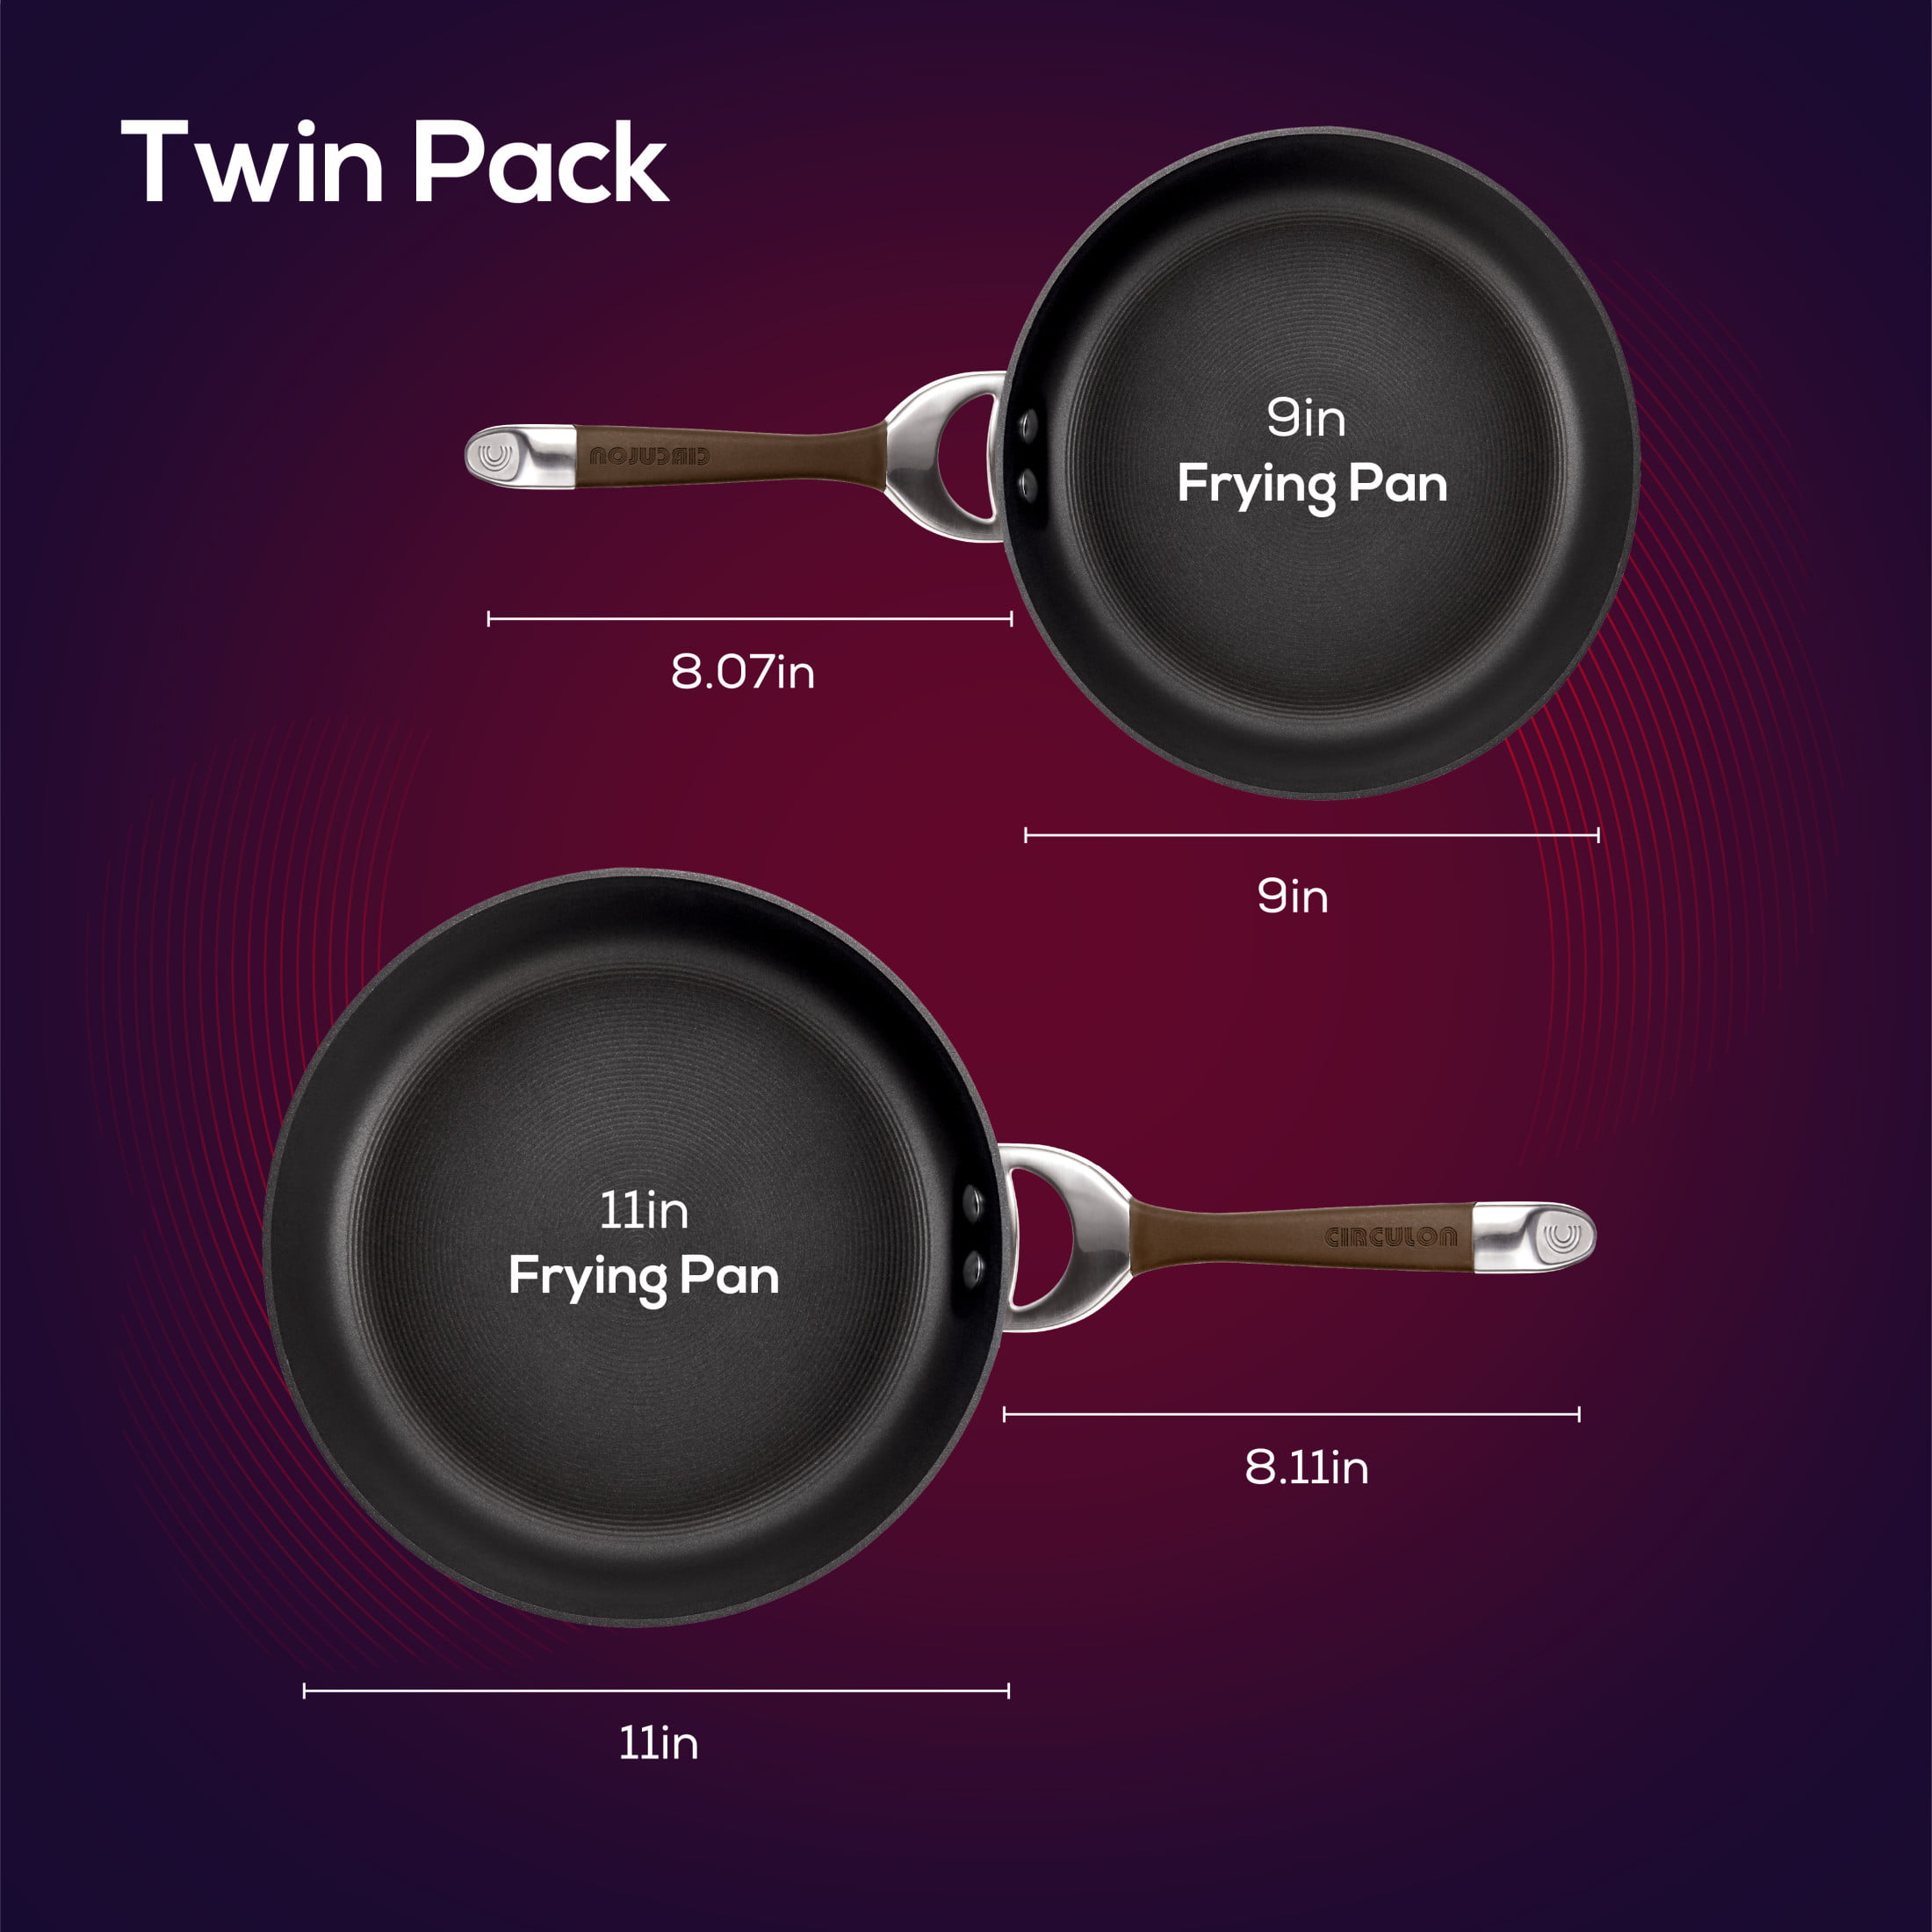 Circulon Symmetry Hard-Anodized Nonstick Cookware Induction Pots and Pans Set, 3-Piece, Chocolate, Size: 3PC